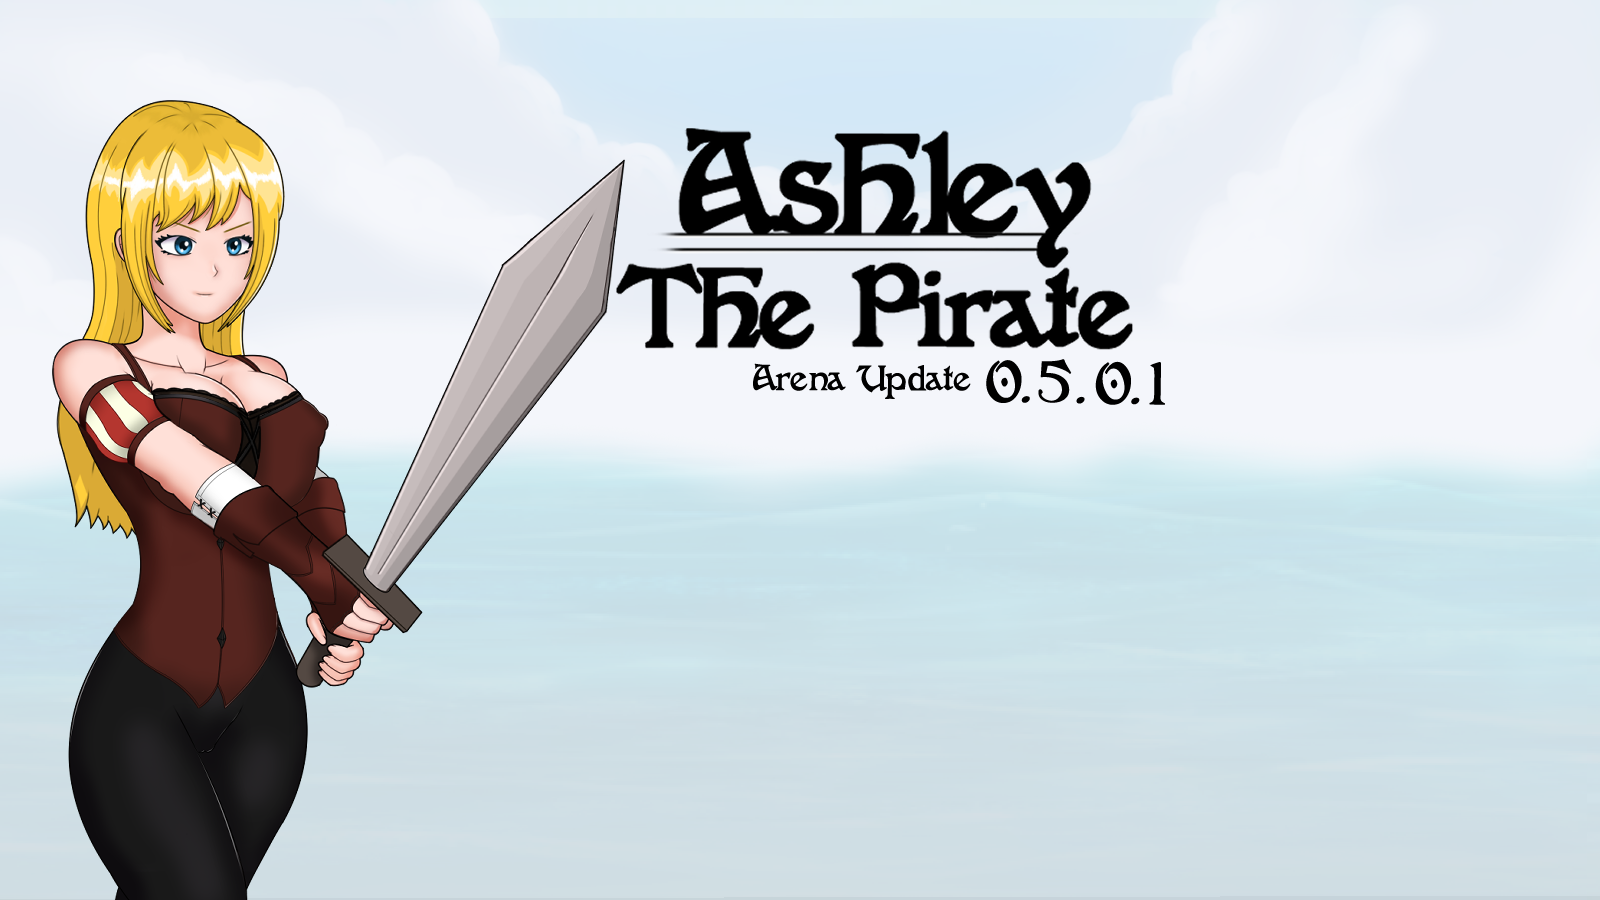 Ashley the pirate 0.5